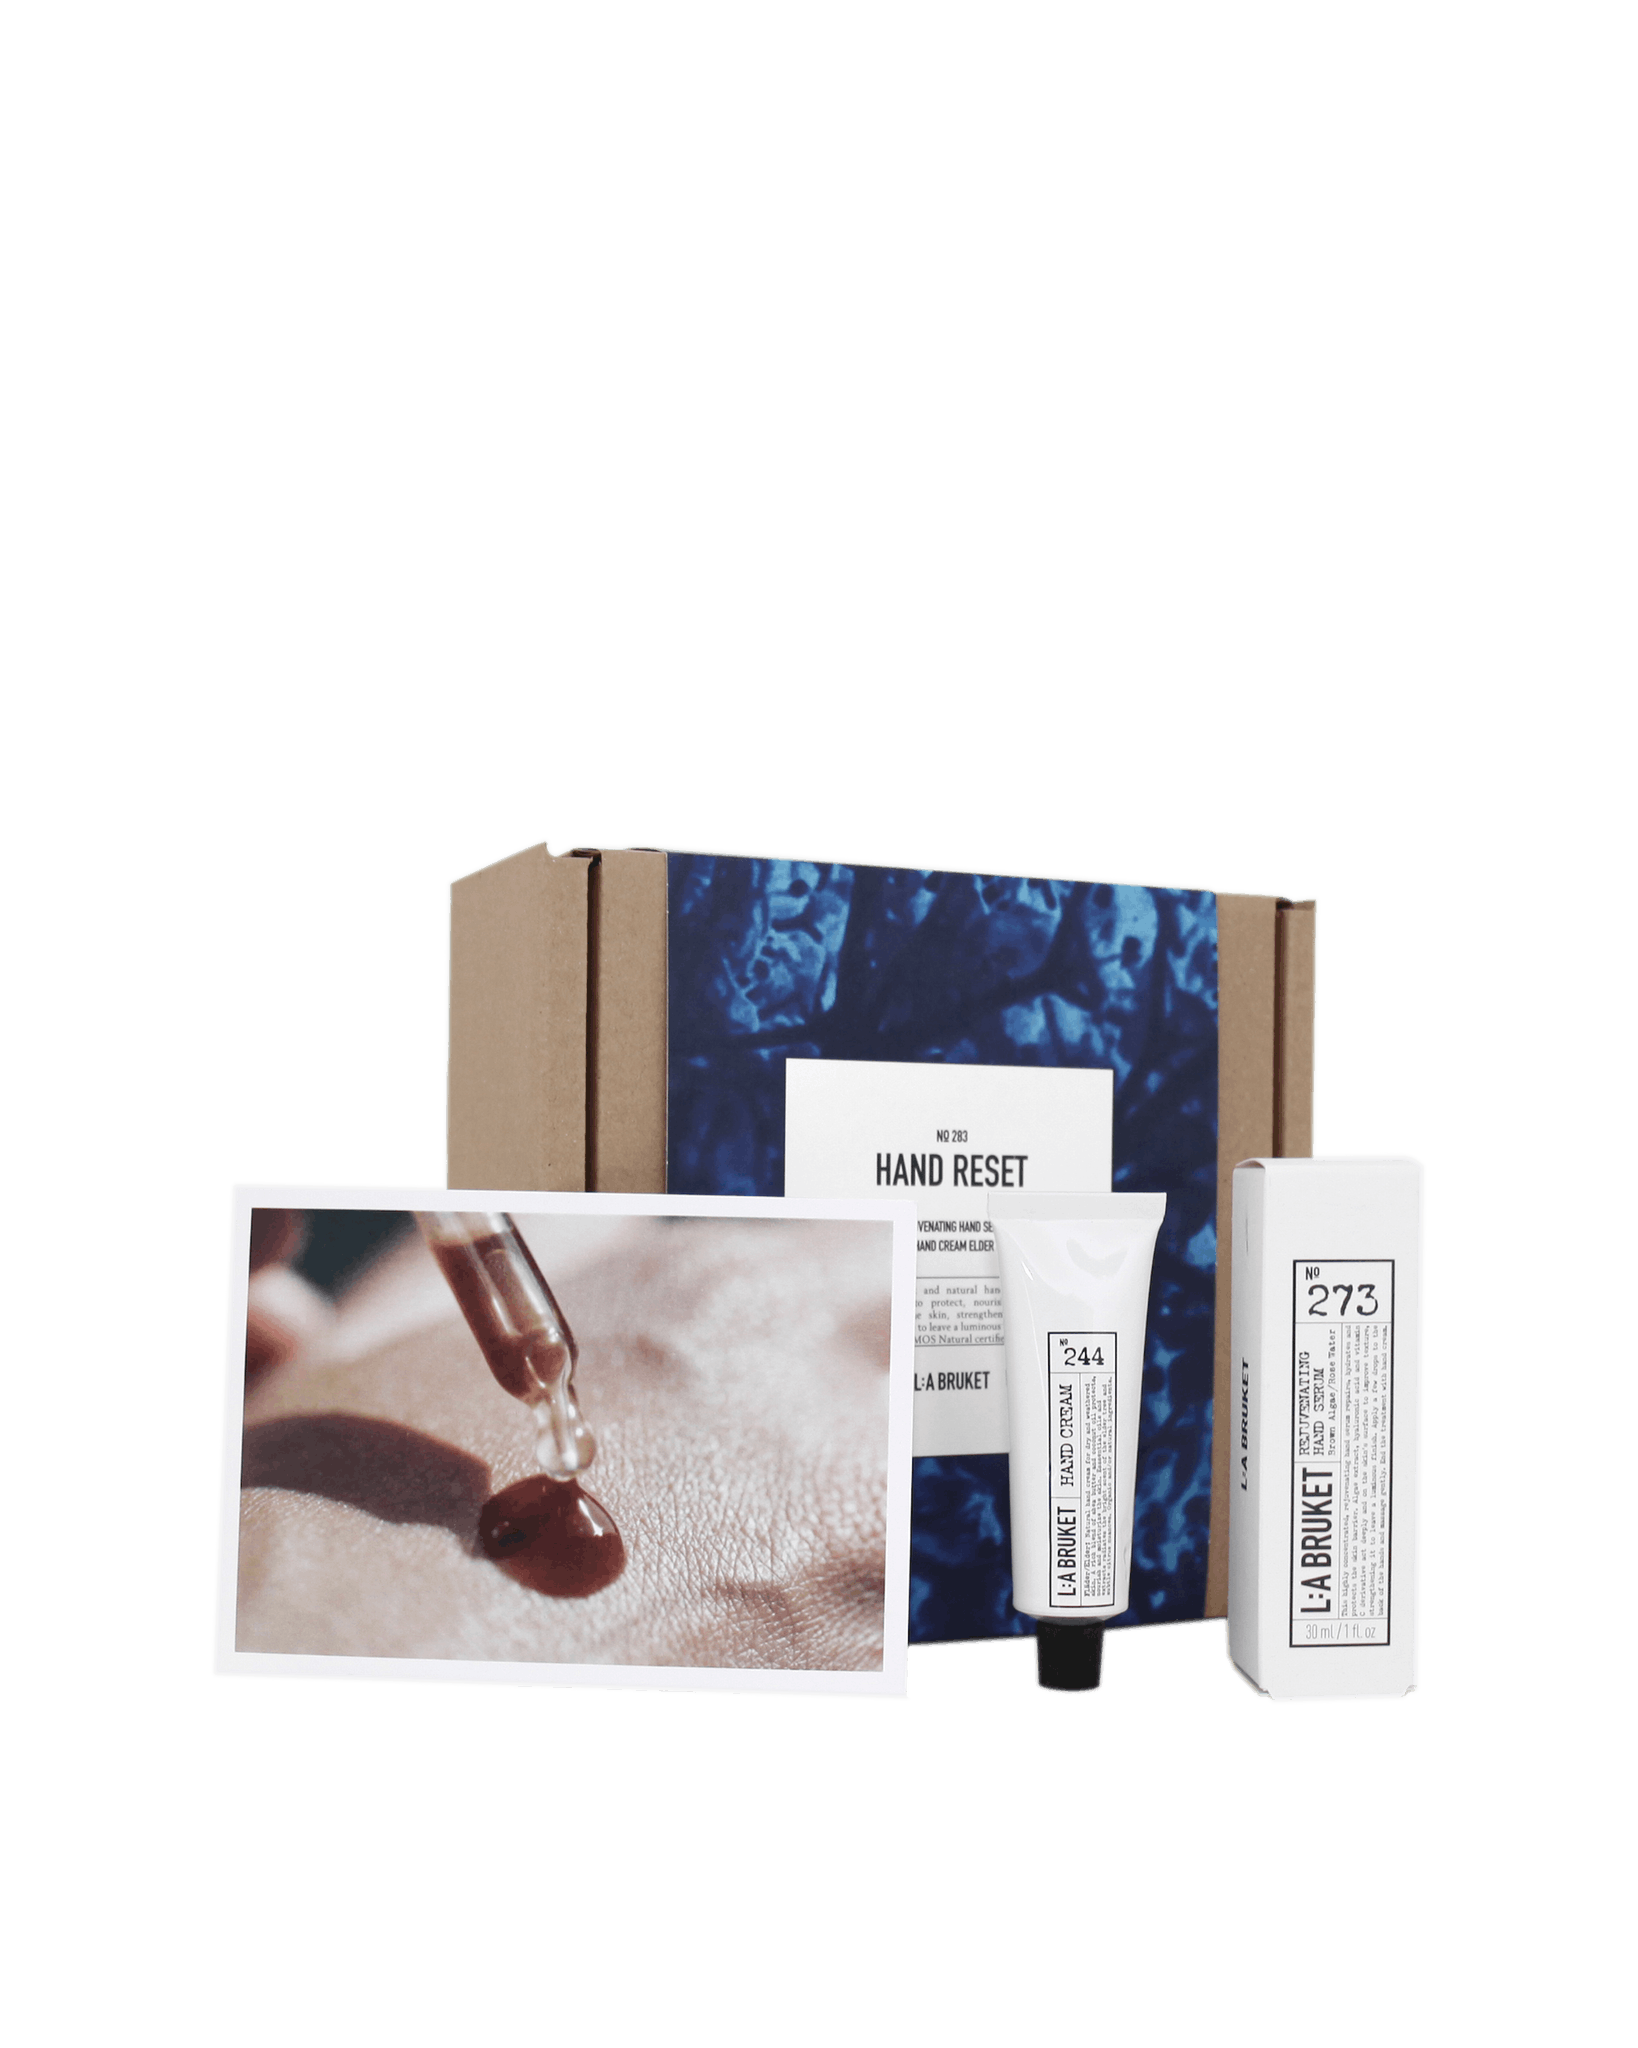 Limited edition gift set of anti ageing hand serum, to fight age spots, liver spots and discoloured skin on the hands, with a soothing hand cream. A wonderful gift for women.